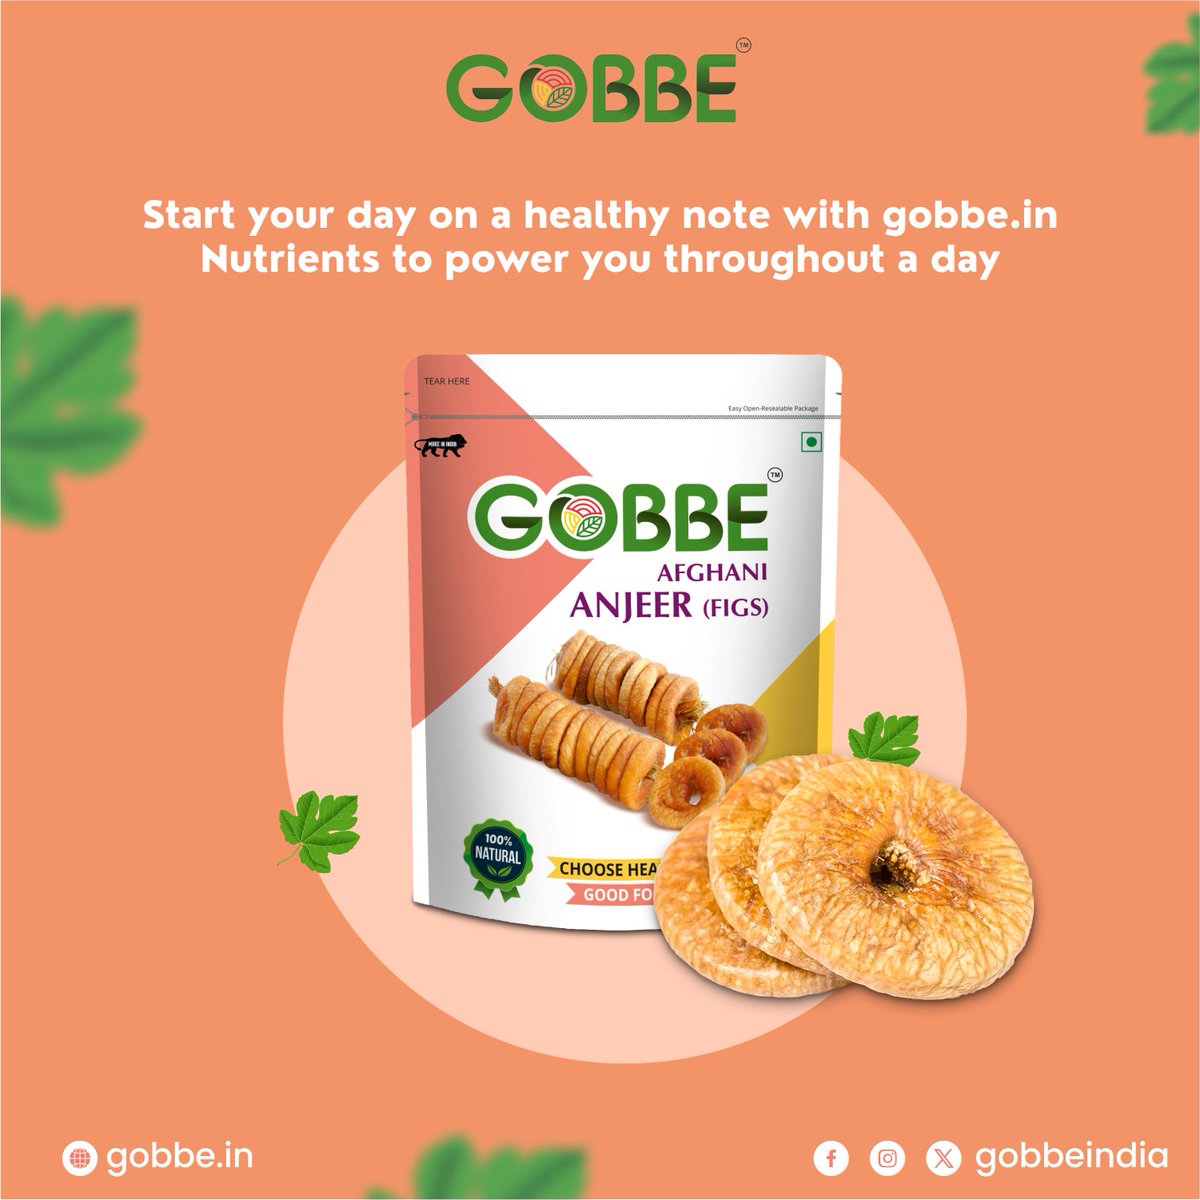 Discover a variety of nutritious dry fruits and seeds at GOBBE - A Health Food Store and Dry Fruit Store. 
linktr.ee/gobbeindia

#gobbe #healthconsciousliving #nutritionnest #premiumdryfruits #nutsandseeds #naturetreasures #qualityindulgence #healthychoices #banglore #india